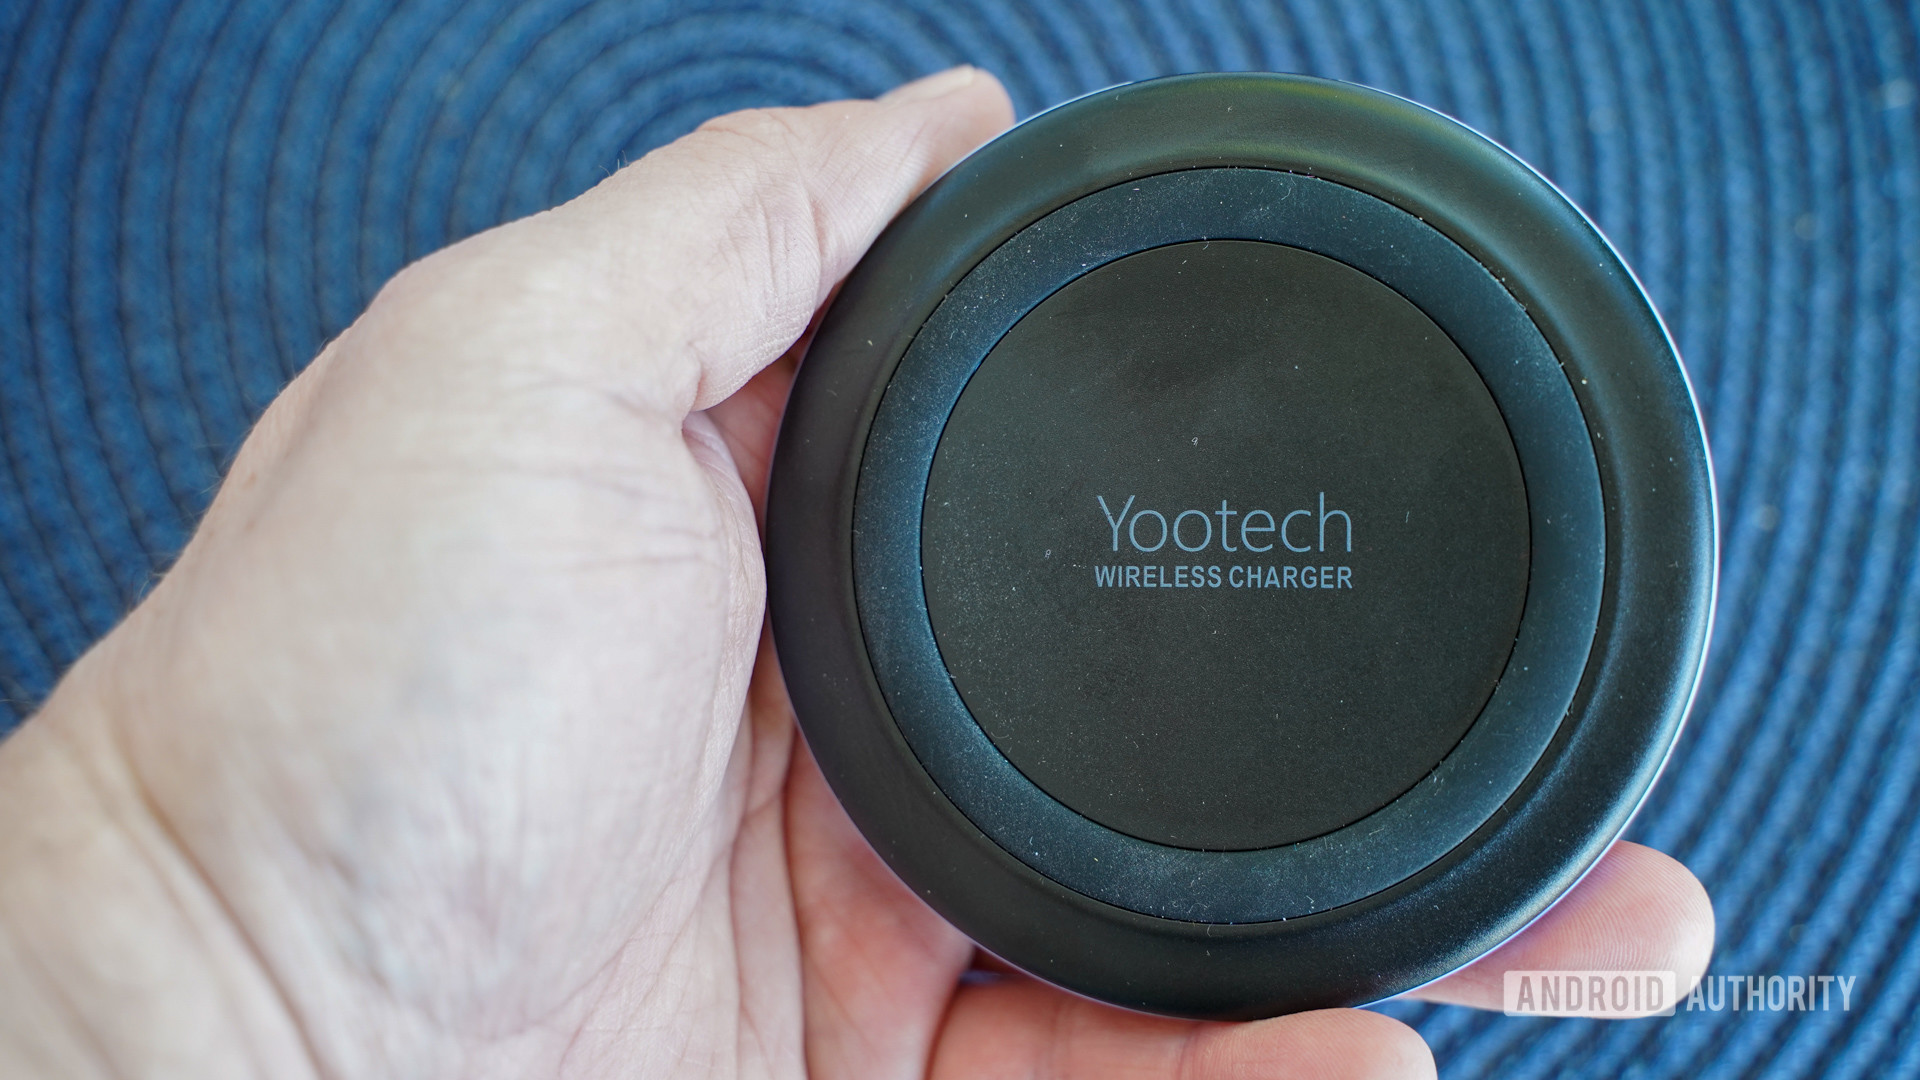 Yootech F500 Wireless Charger in the hand for size